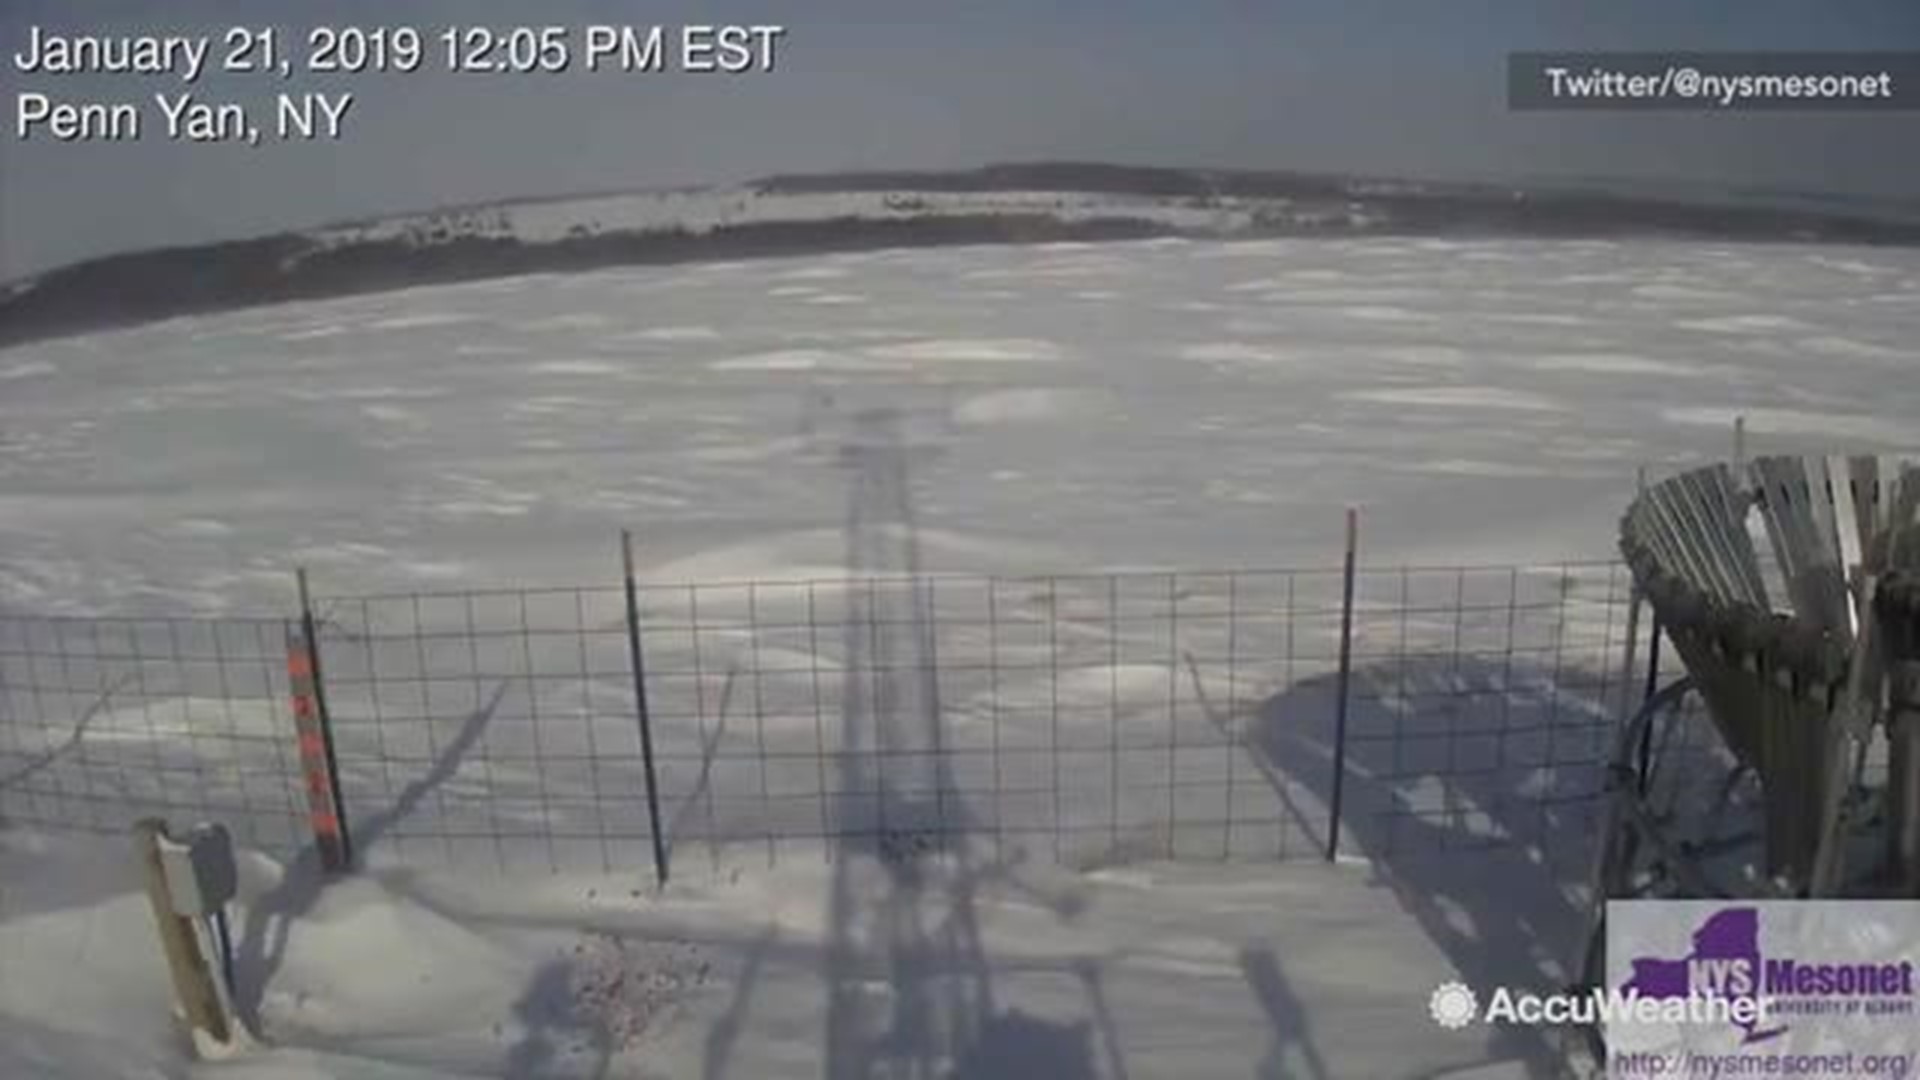 Wind gusts of 30 - 40 mph created these 'snow waves' on a field in Penn Yan, New York on January 21st.